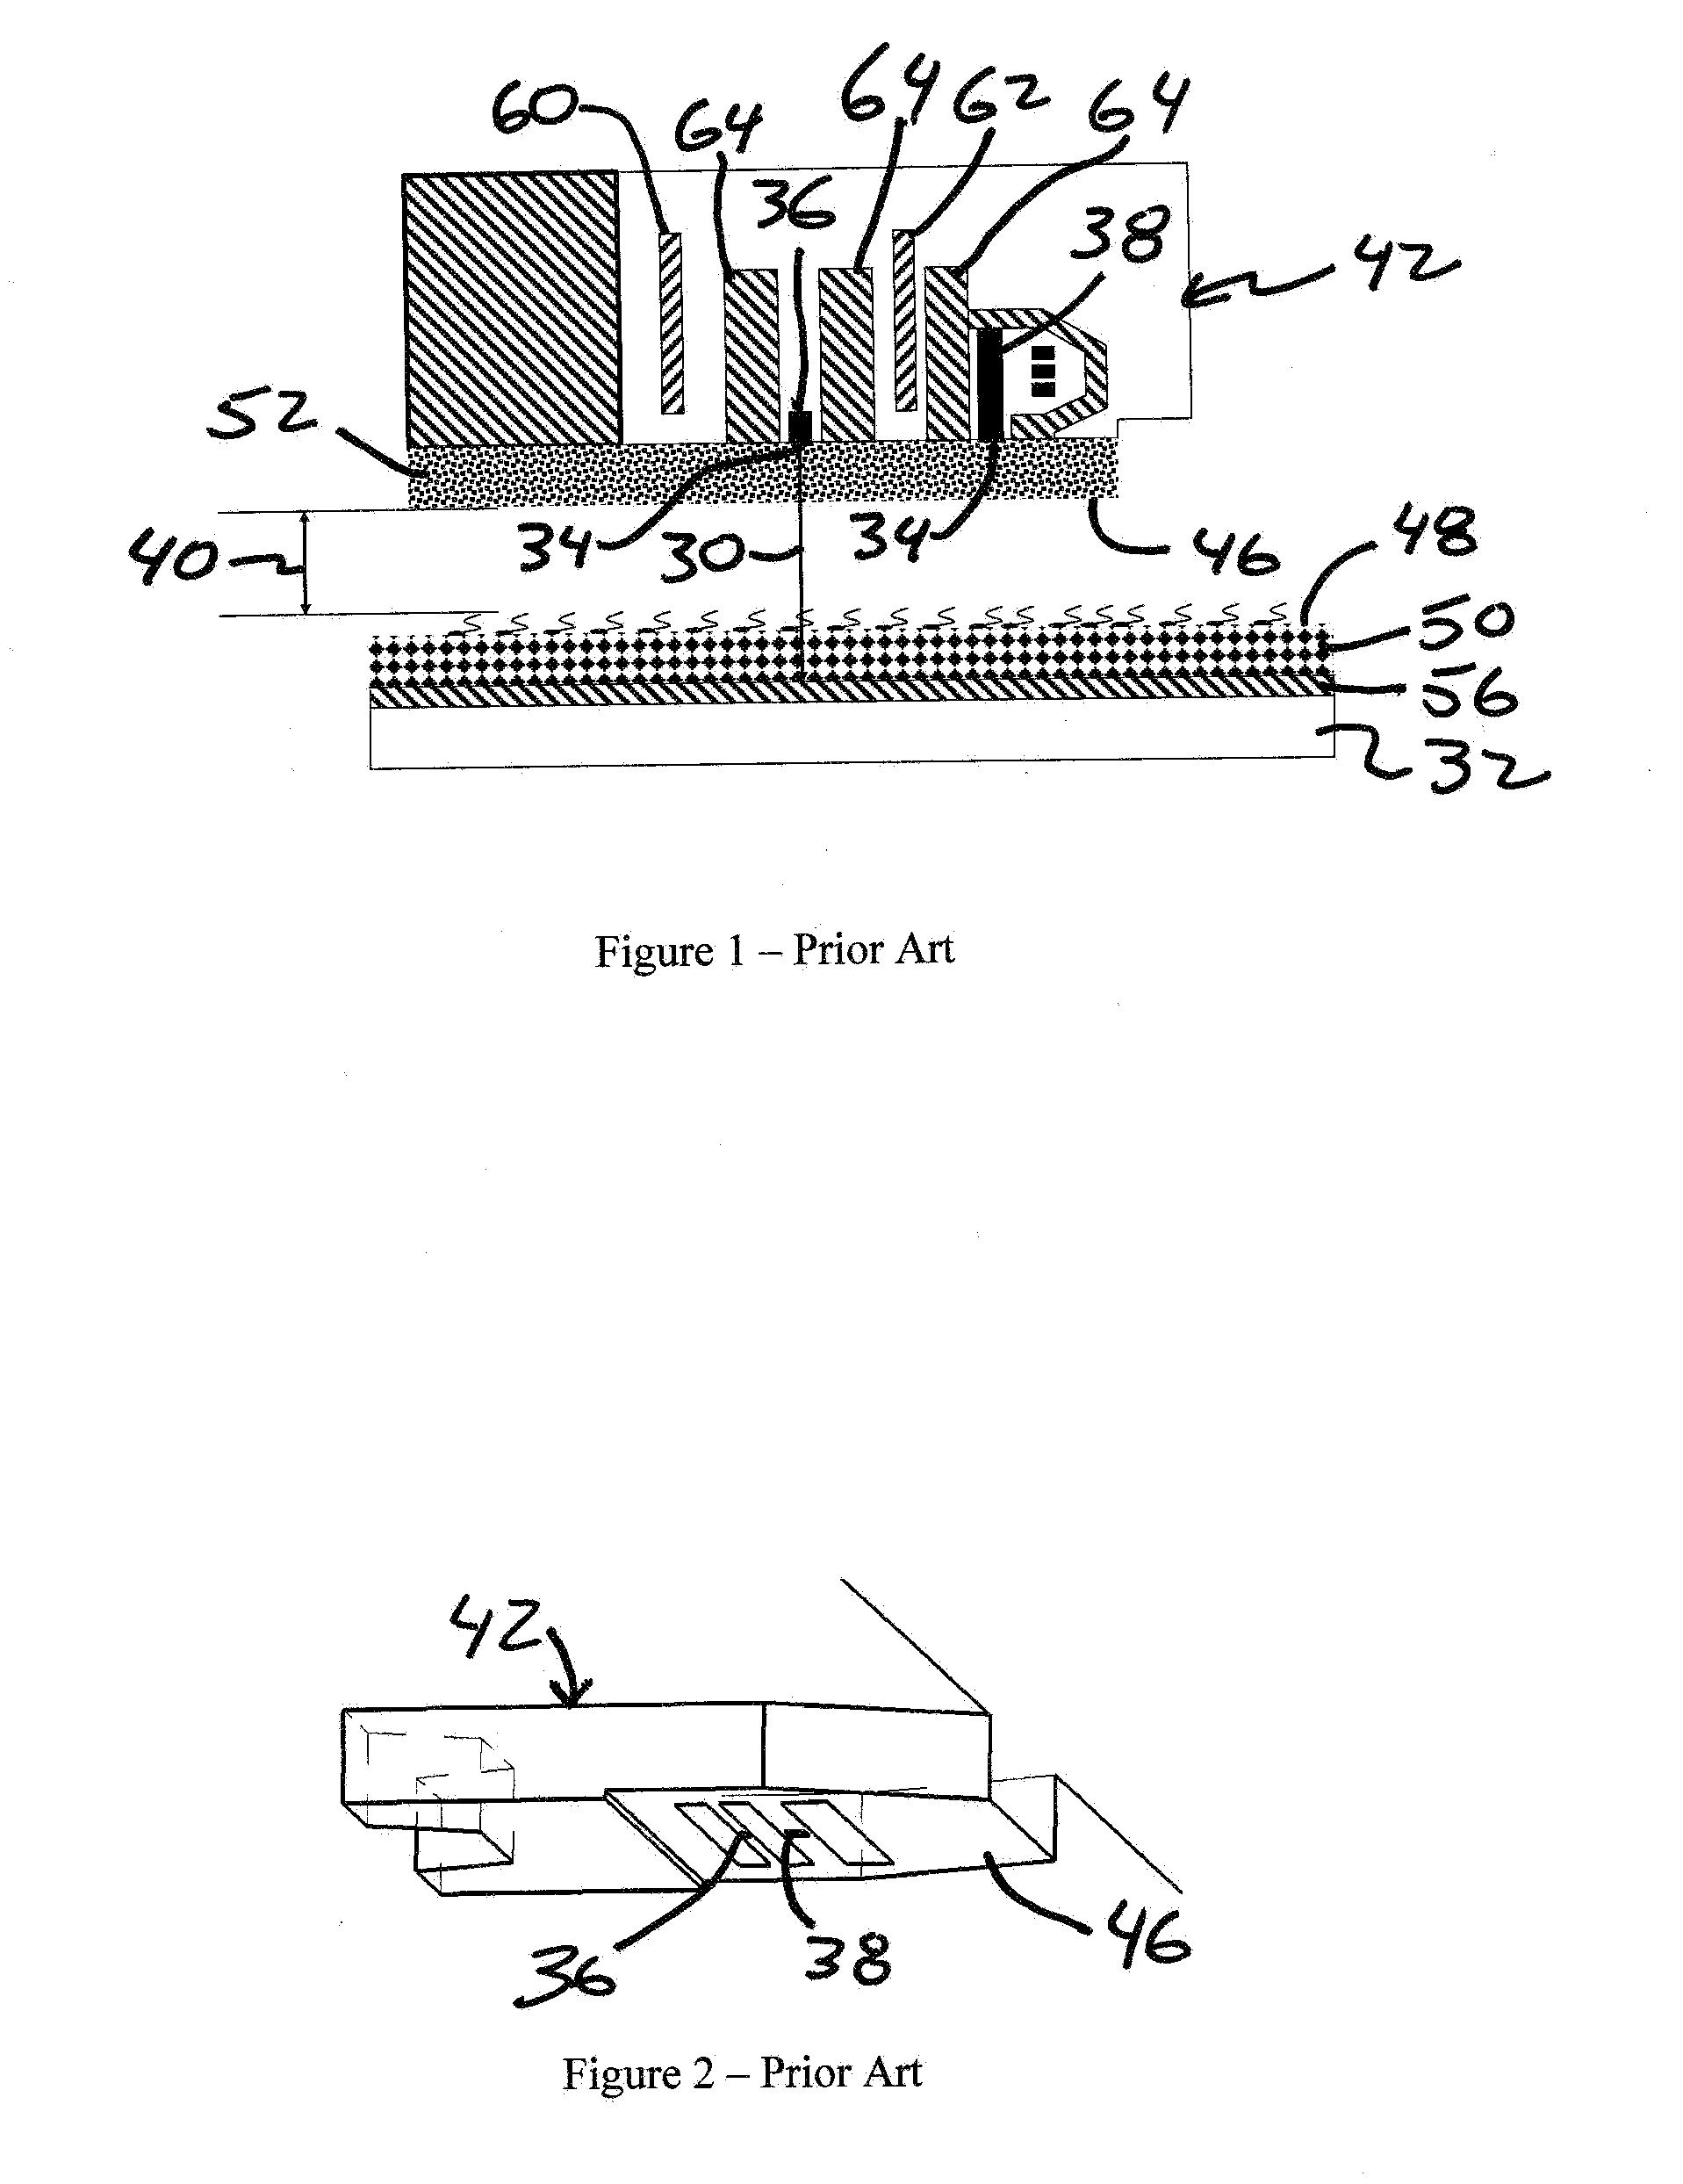 Method and Apparatus for Reducing Head Media Spacing in a Disk Drive